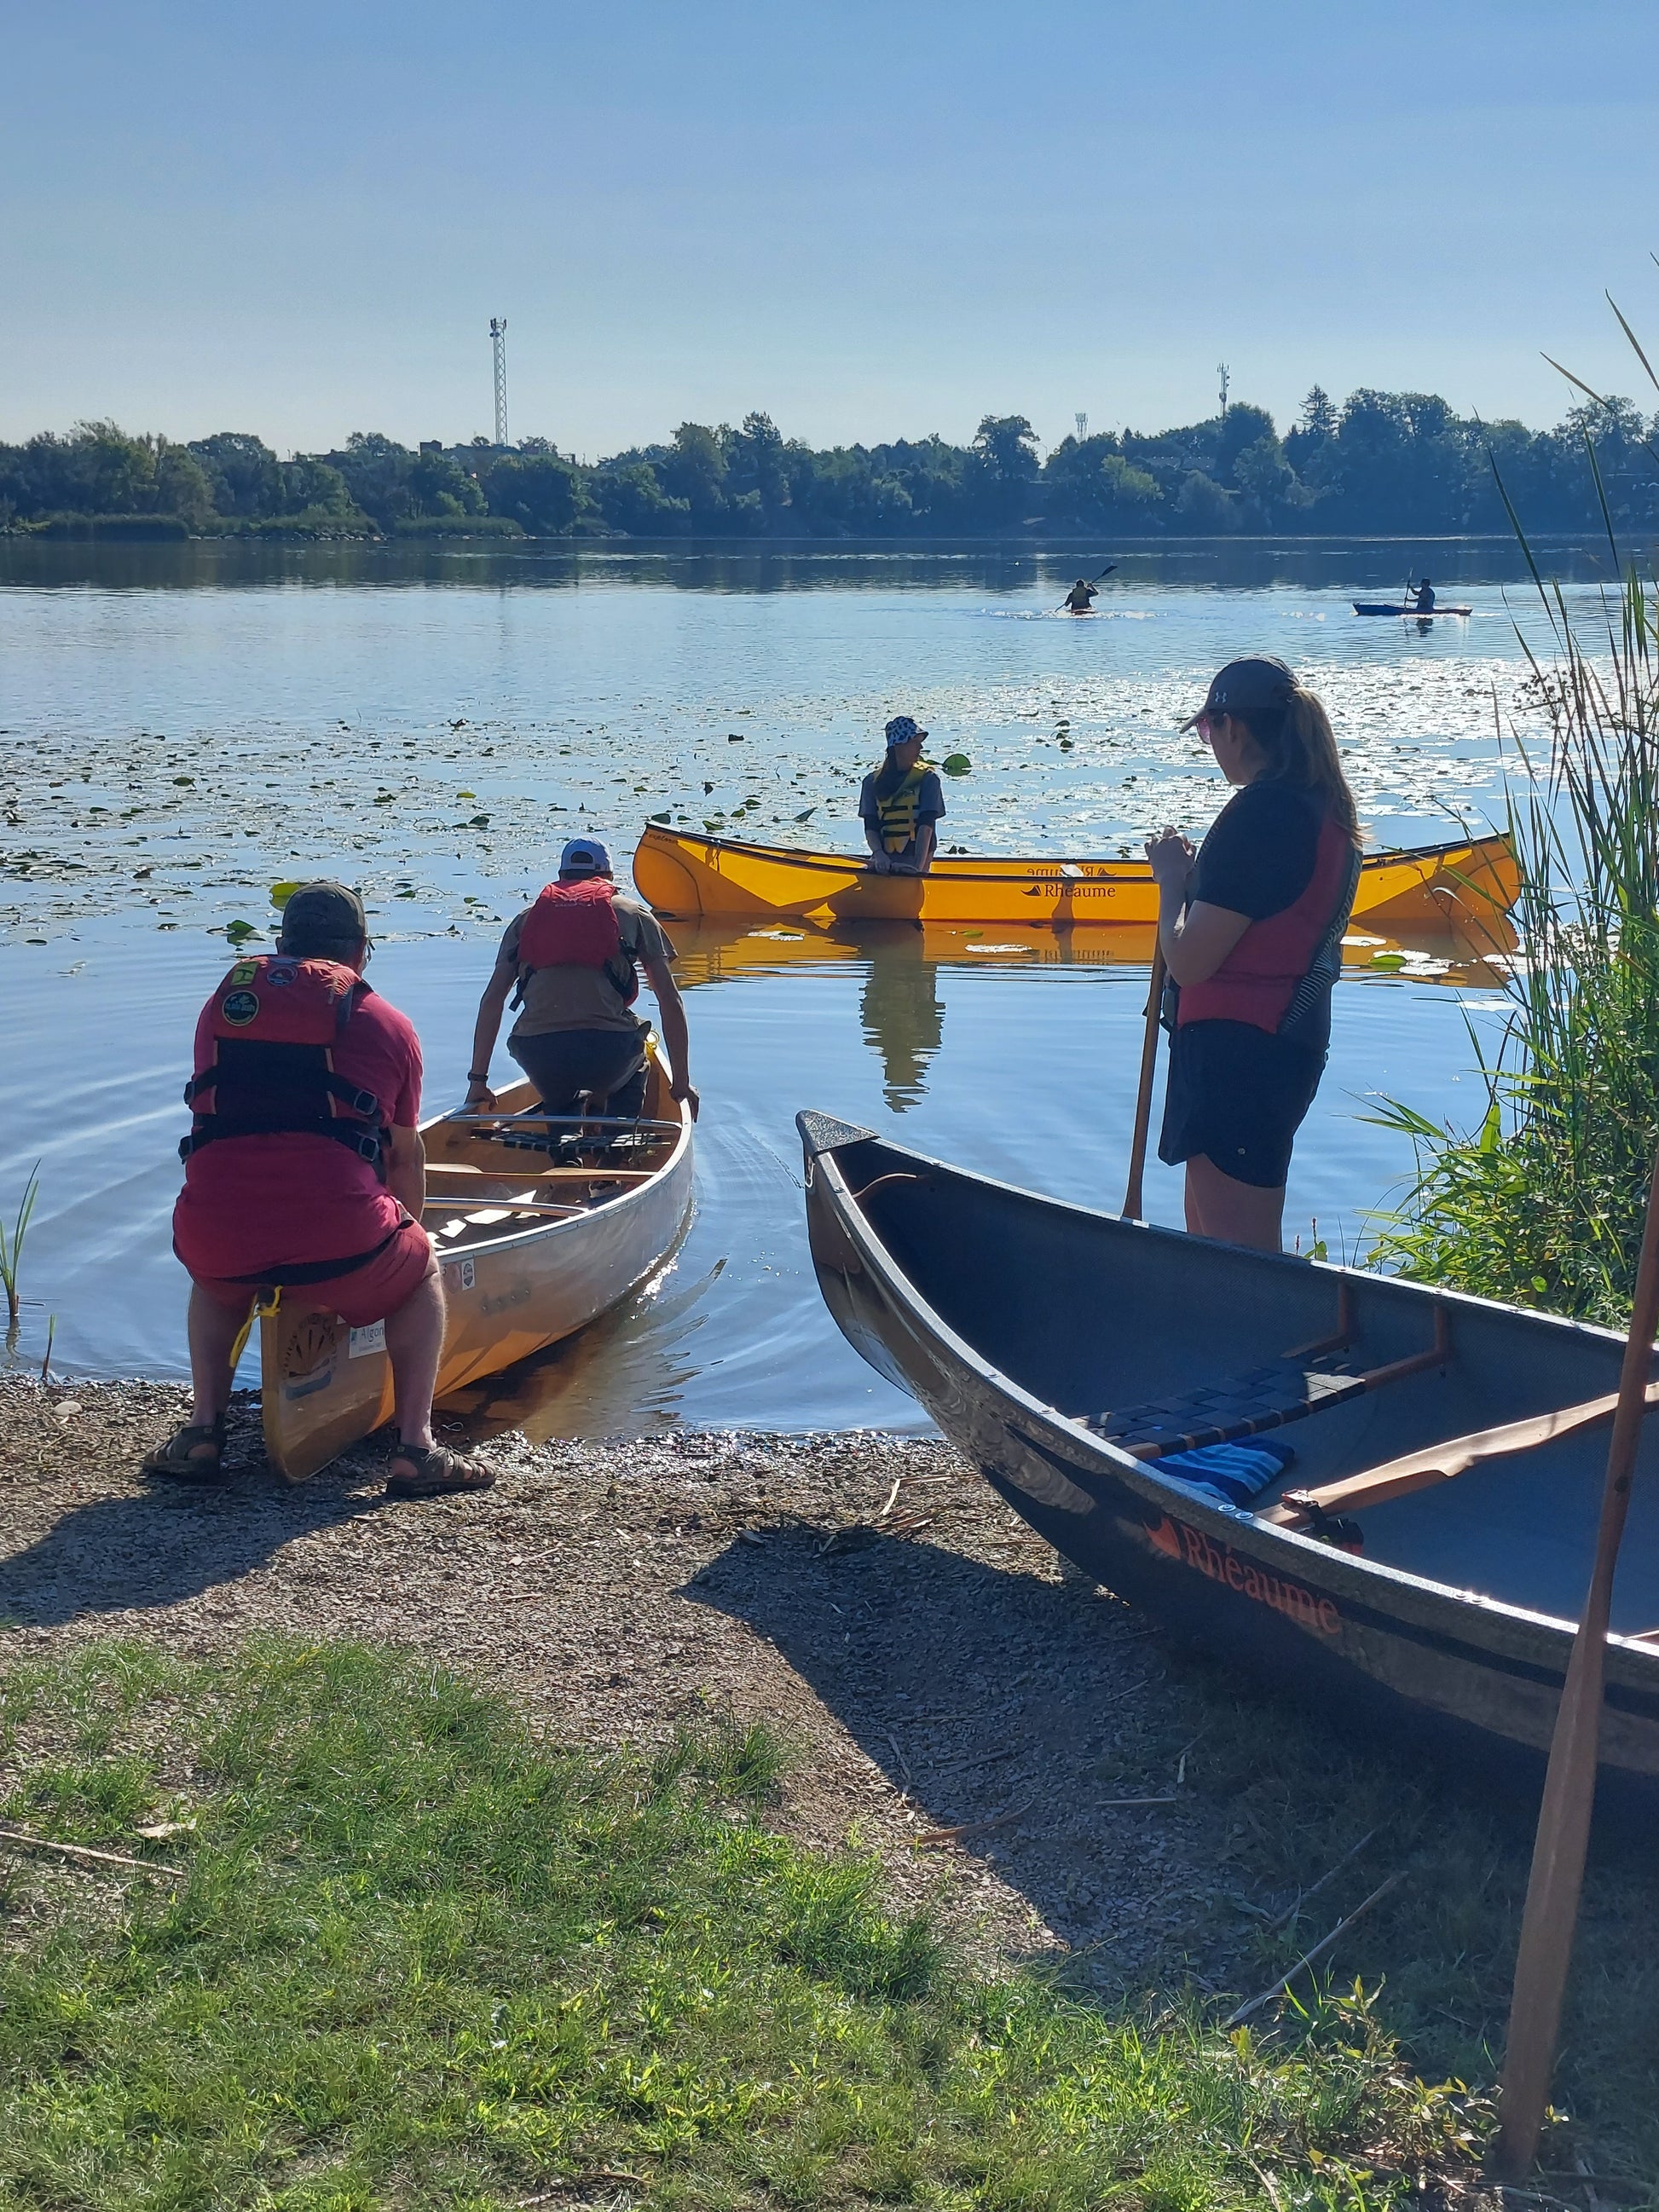 Niagara ORCKA Canoeing Courses: Diverse Course Levels for All Abilities: